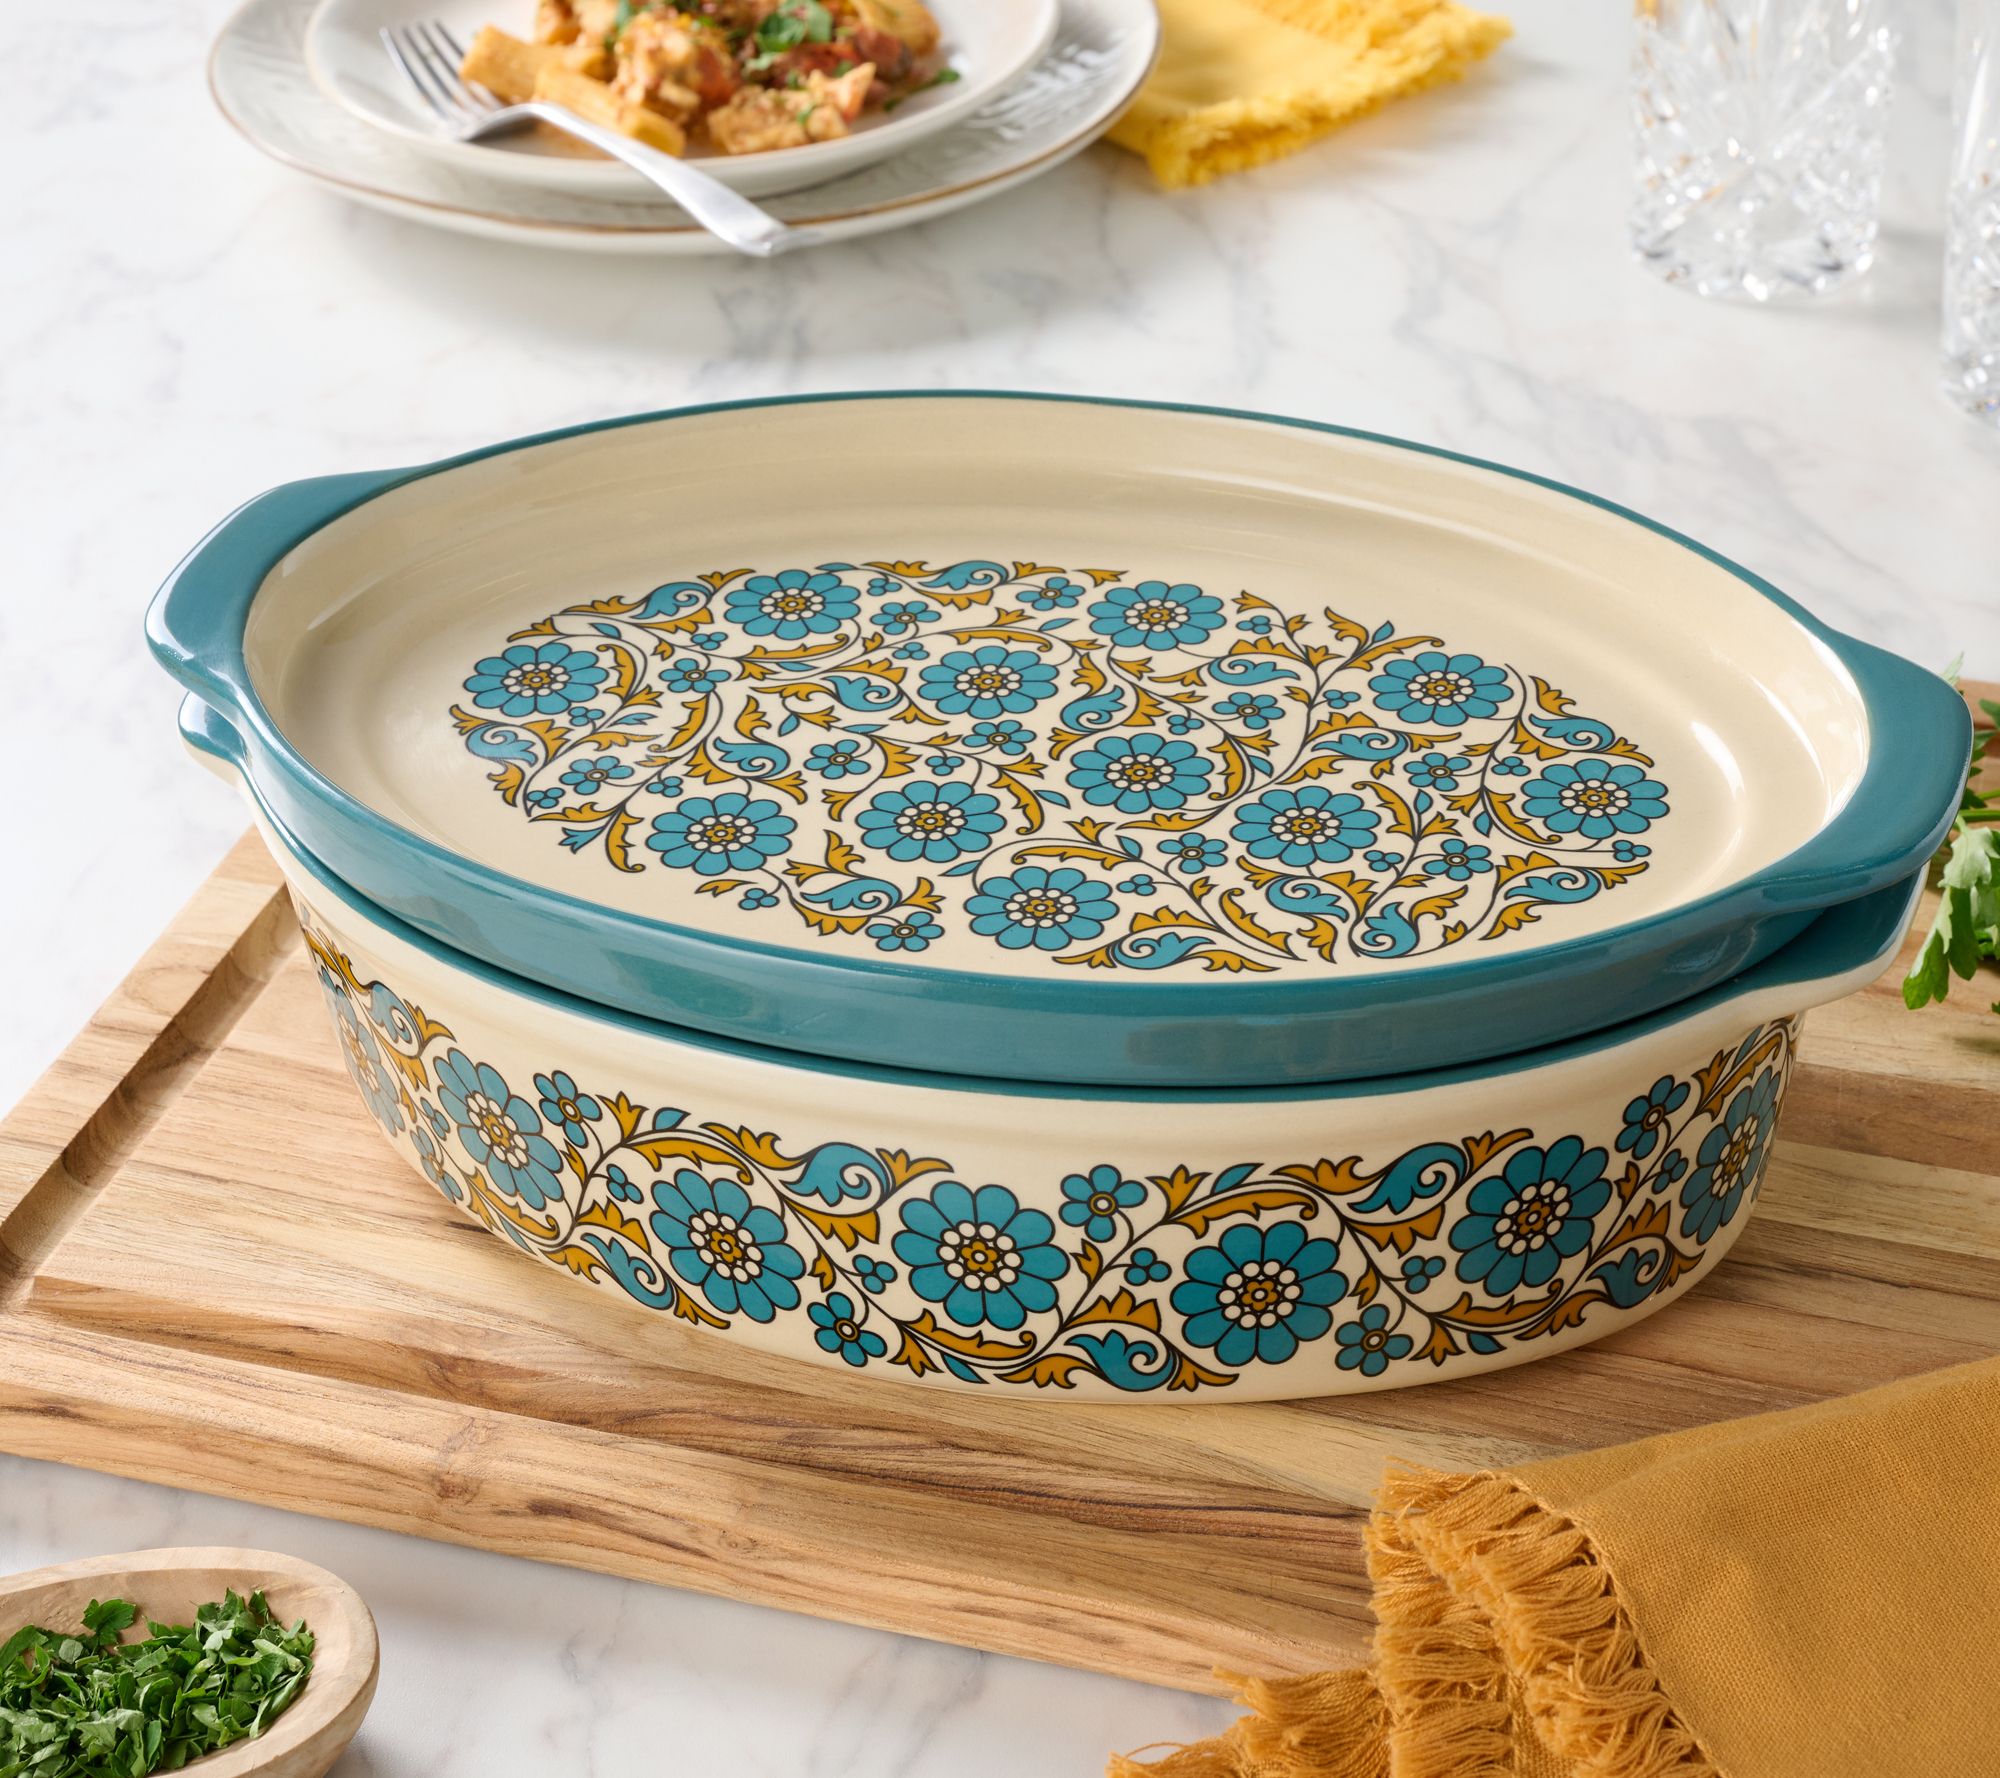 New Porcelain Enamel Baking Dishes and Platters Rolling Out of the Oven!, Inspiration